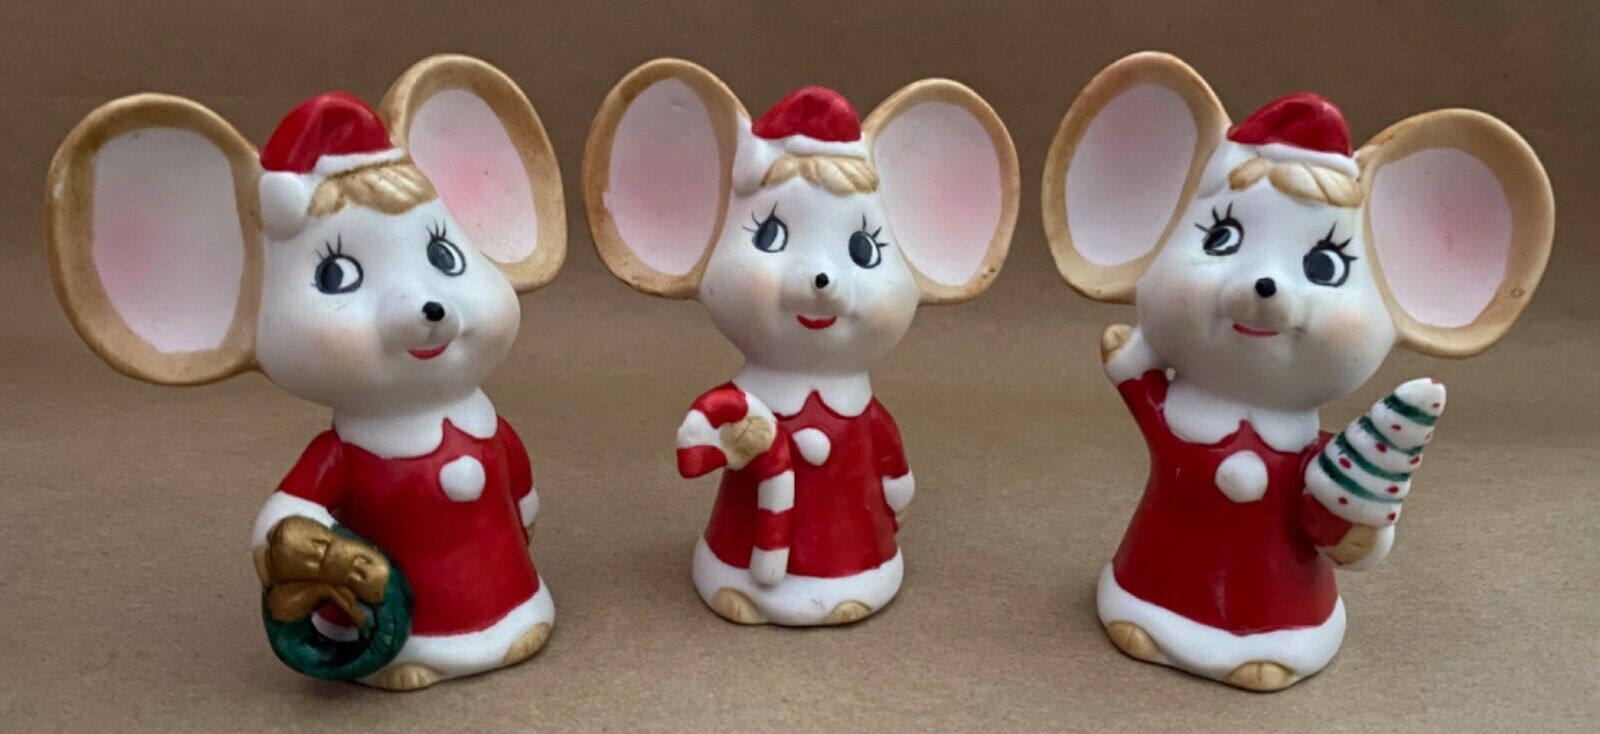 Set Of 3 Vintage Christmas Decorative Mice Figurines Collectible Mouse Figures